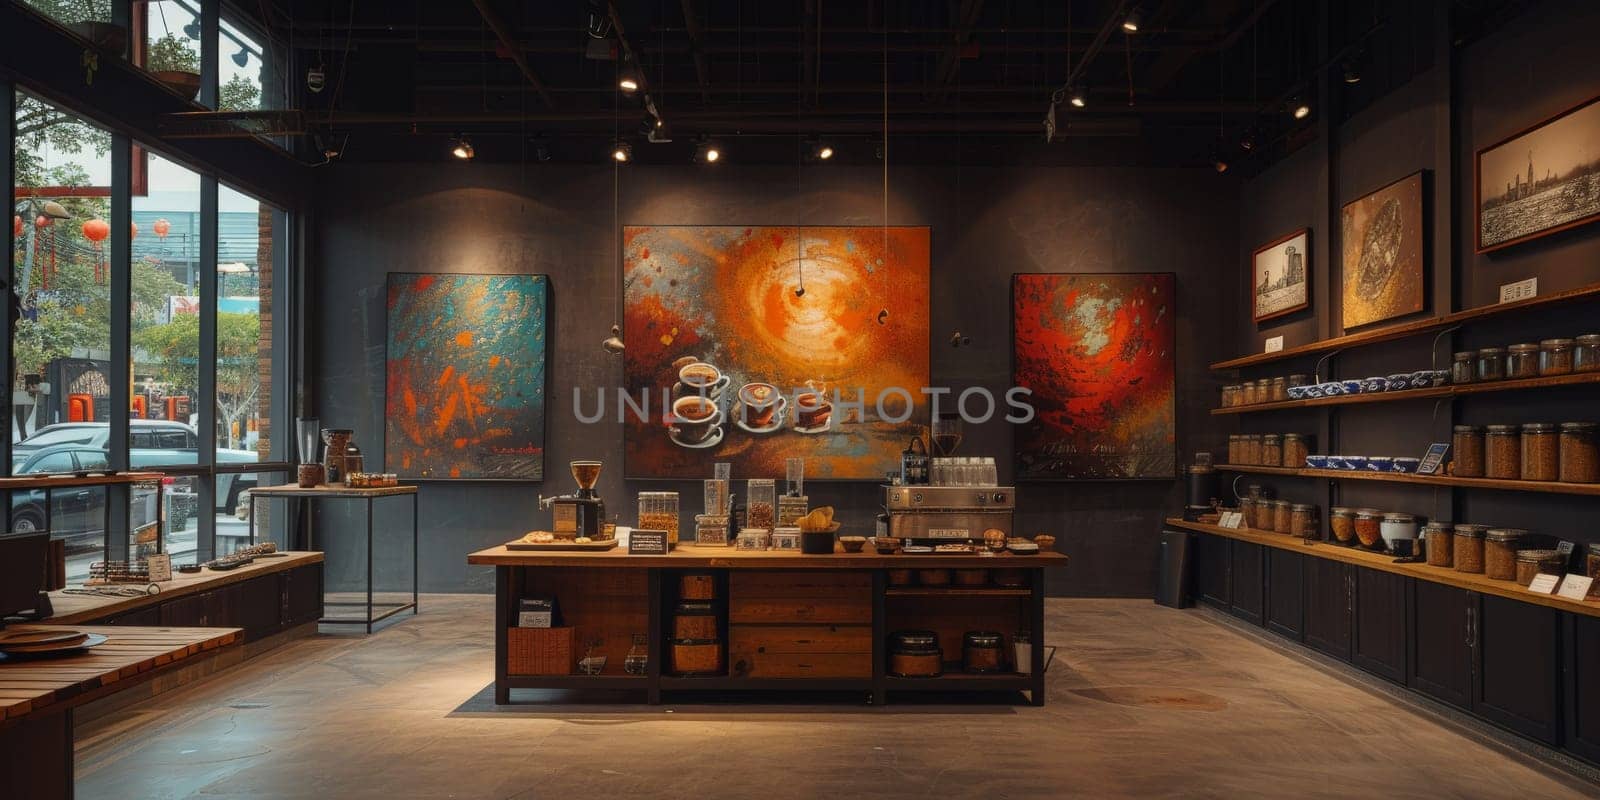 Shot of a shop display full of coffee themed art Exhibitions festival theme and some art decoration.